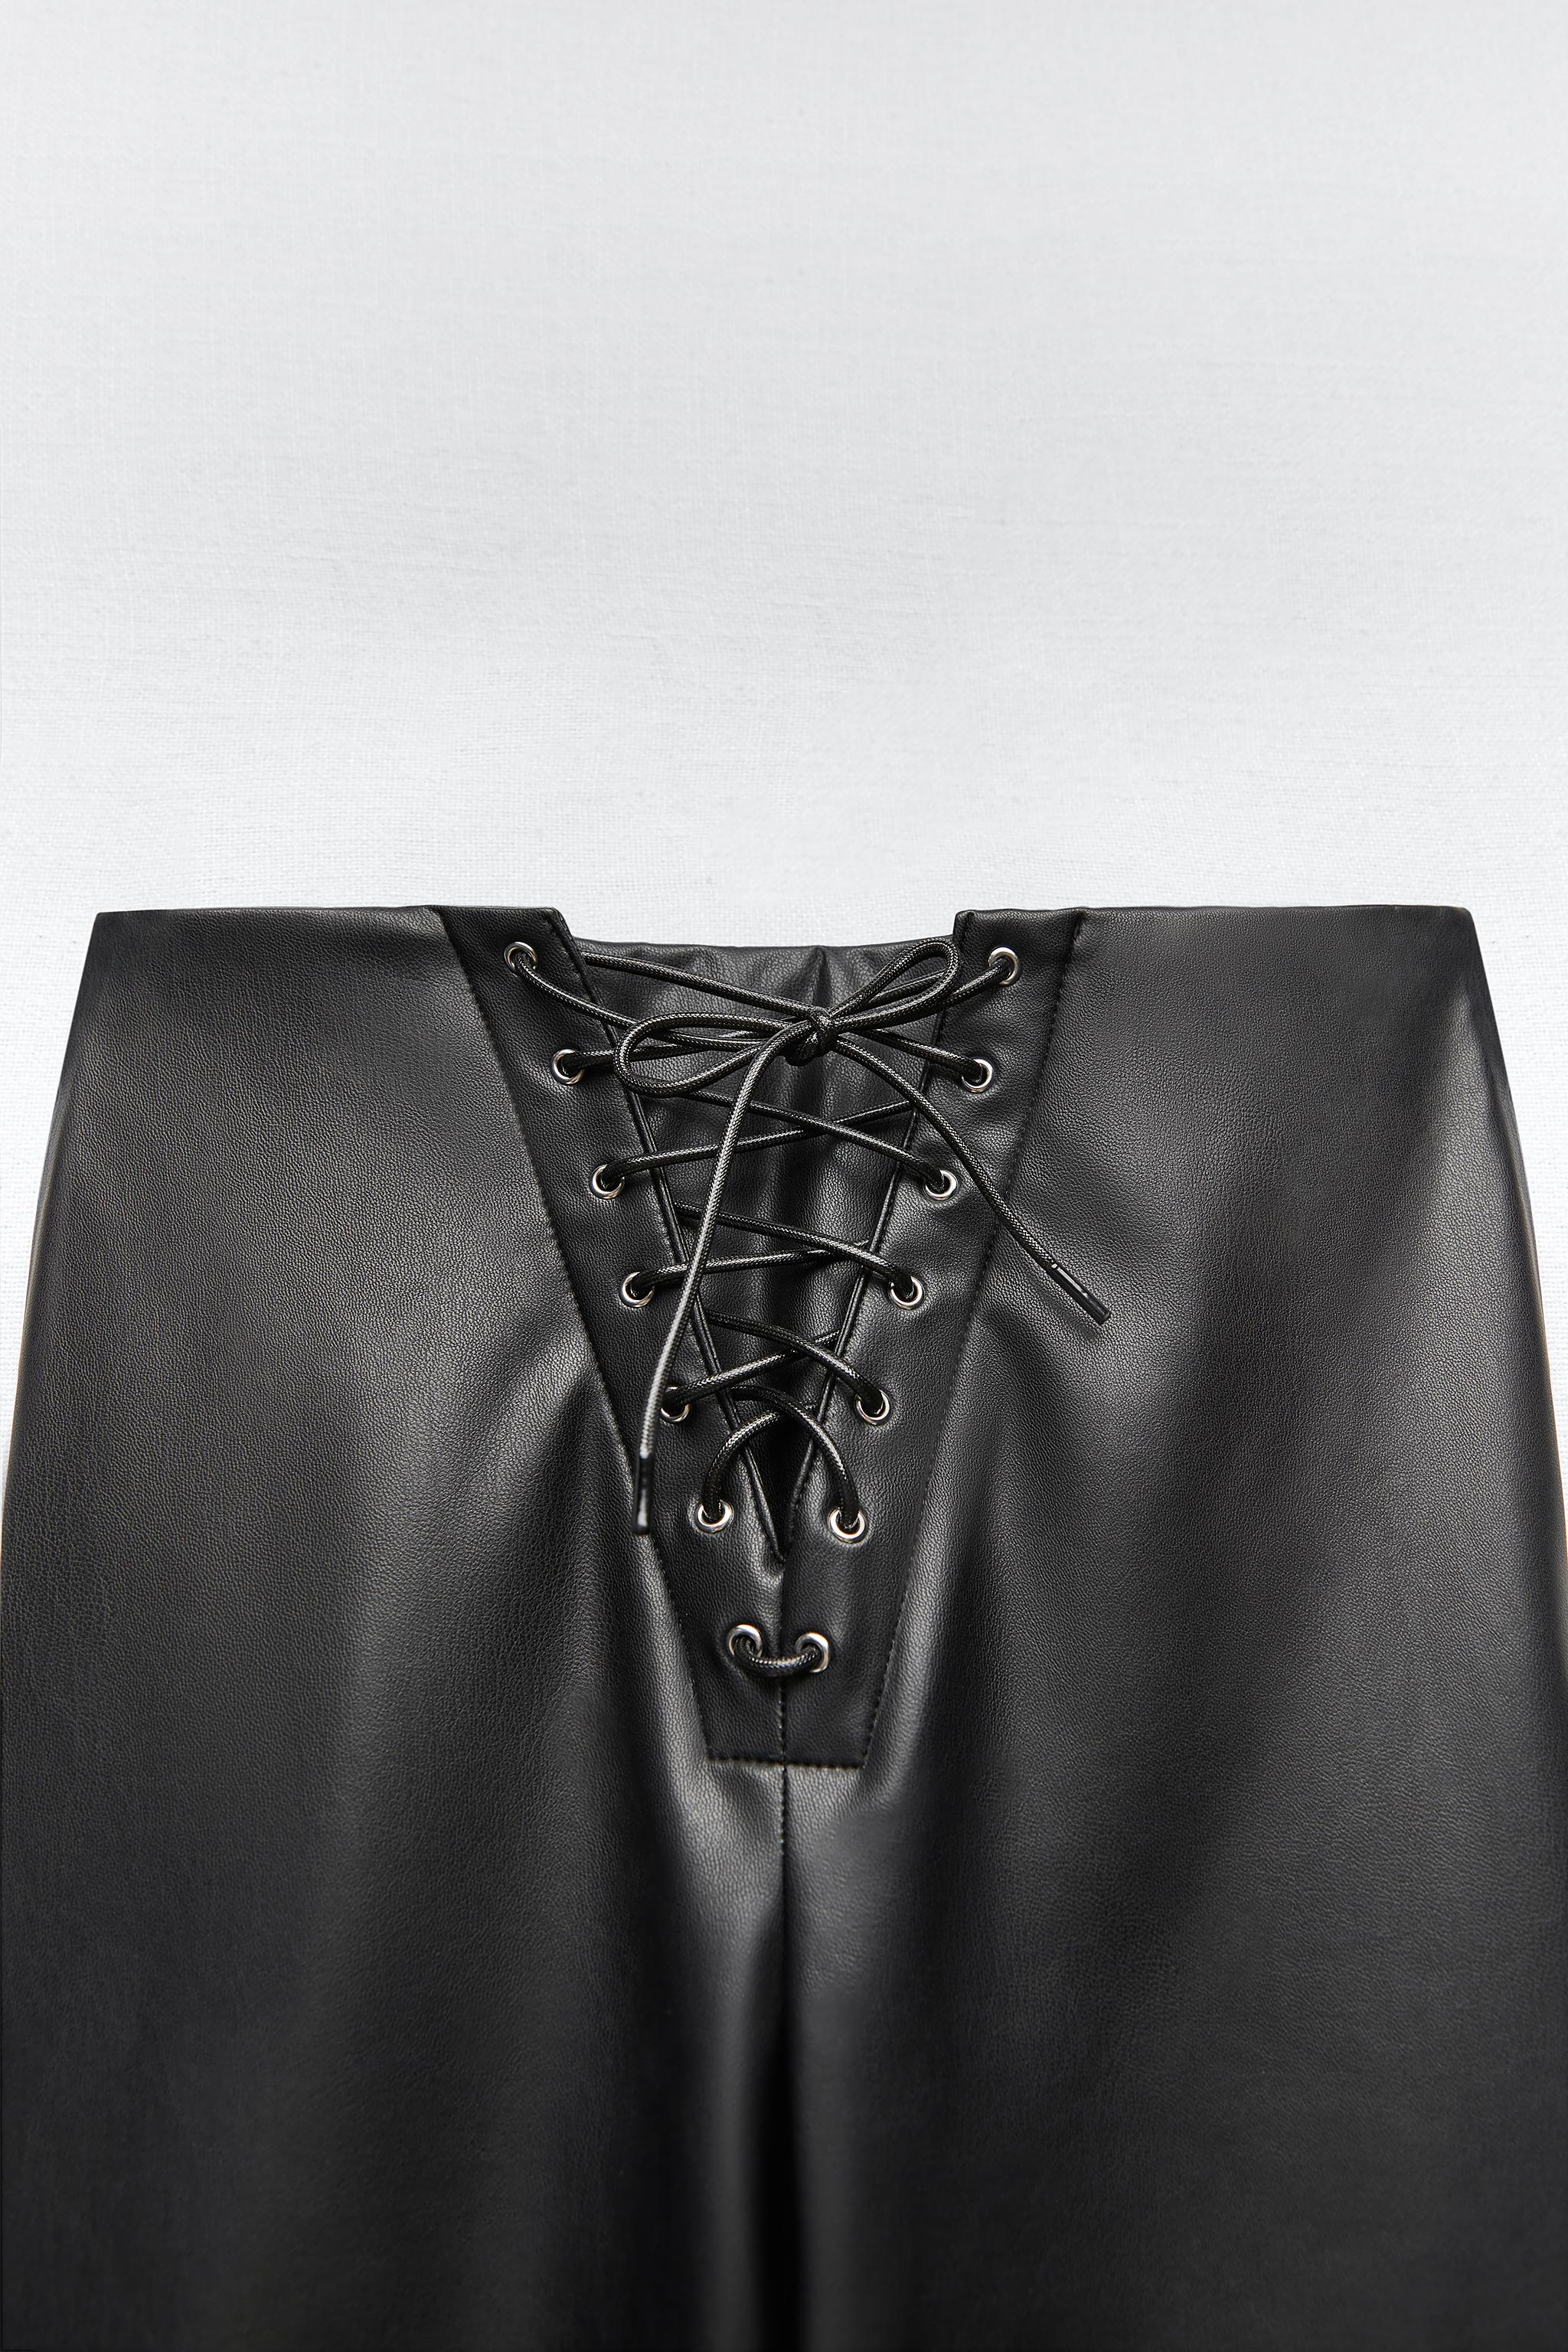 LEATHER EFFECT FULL LENGTH TROUSERS - Black